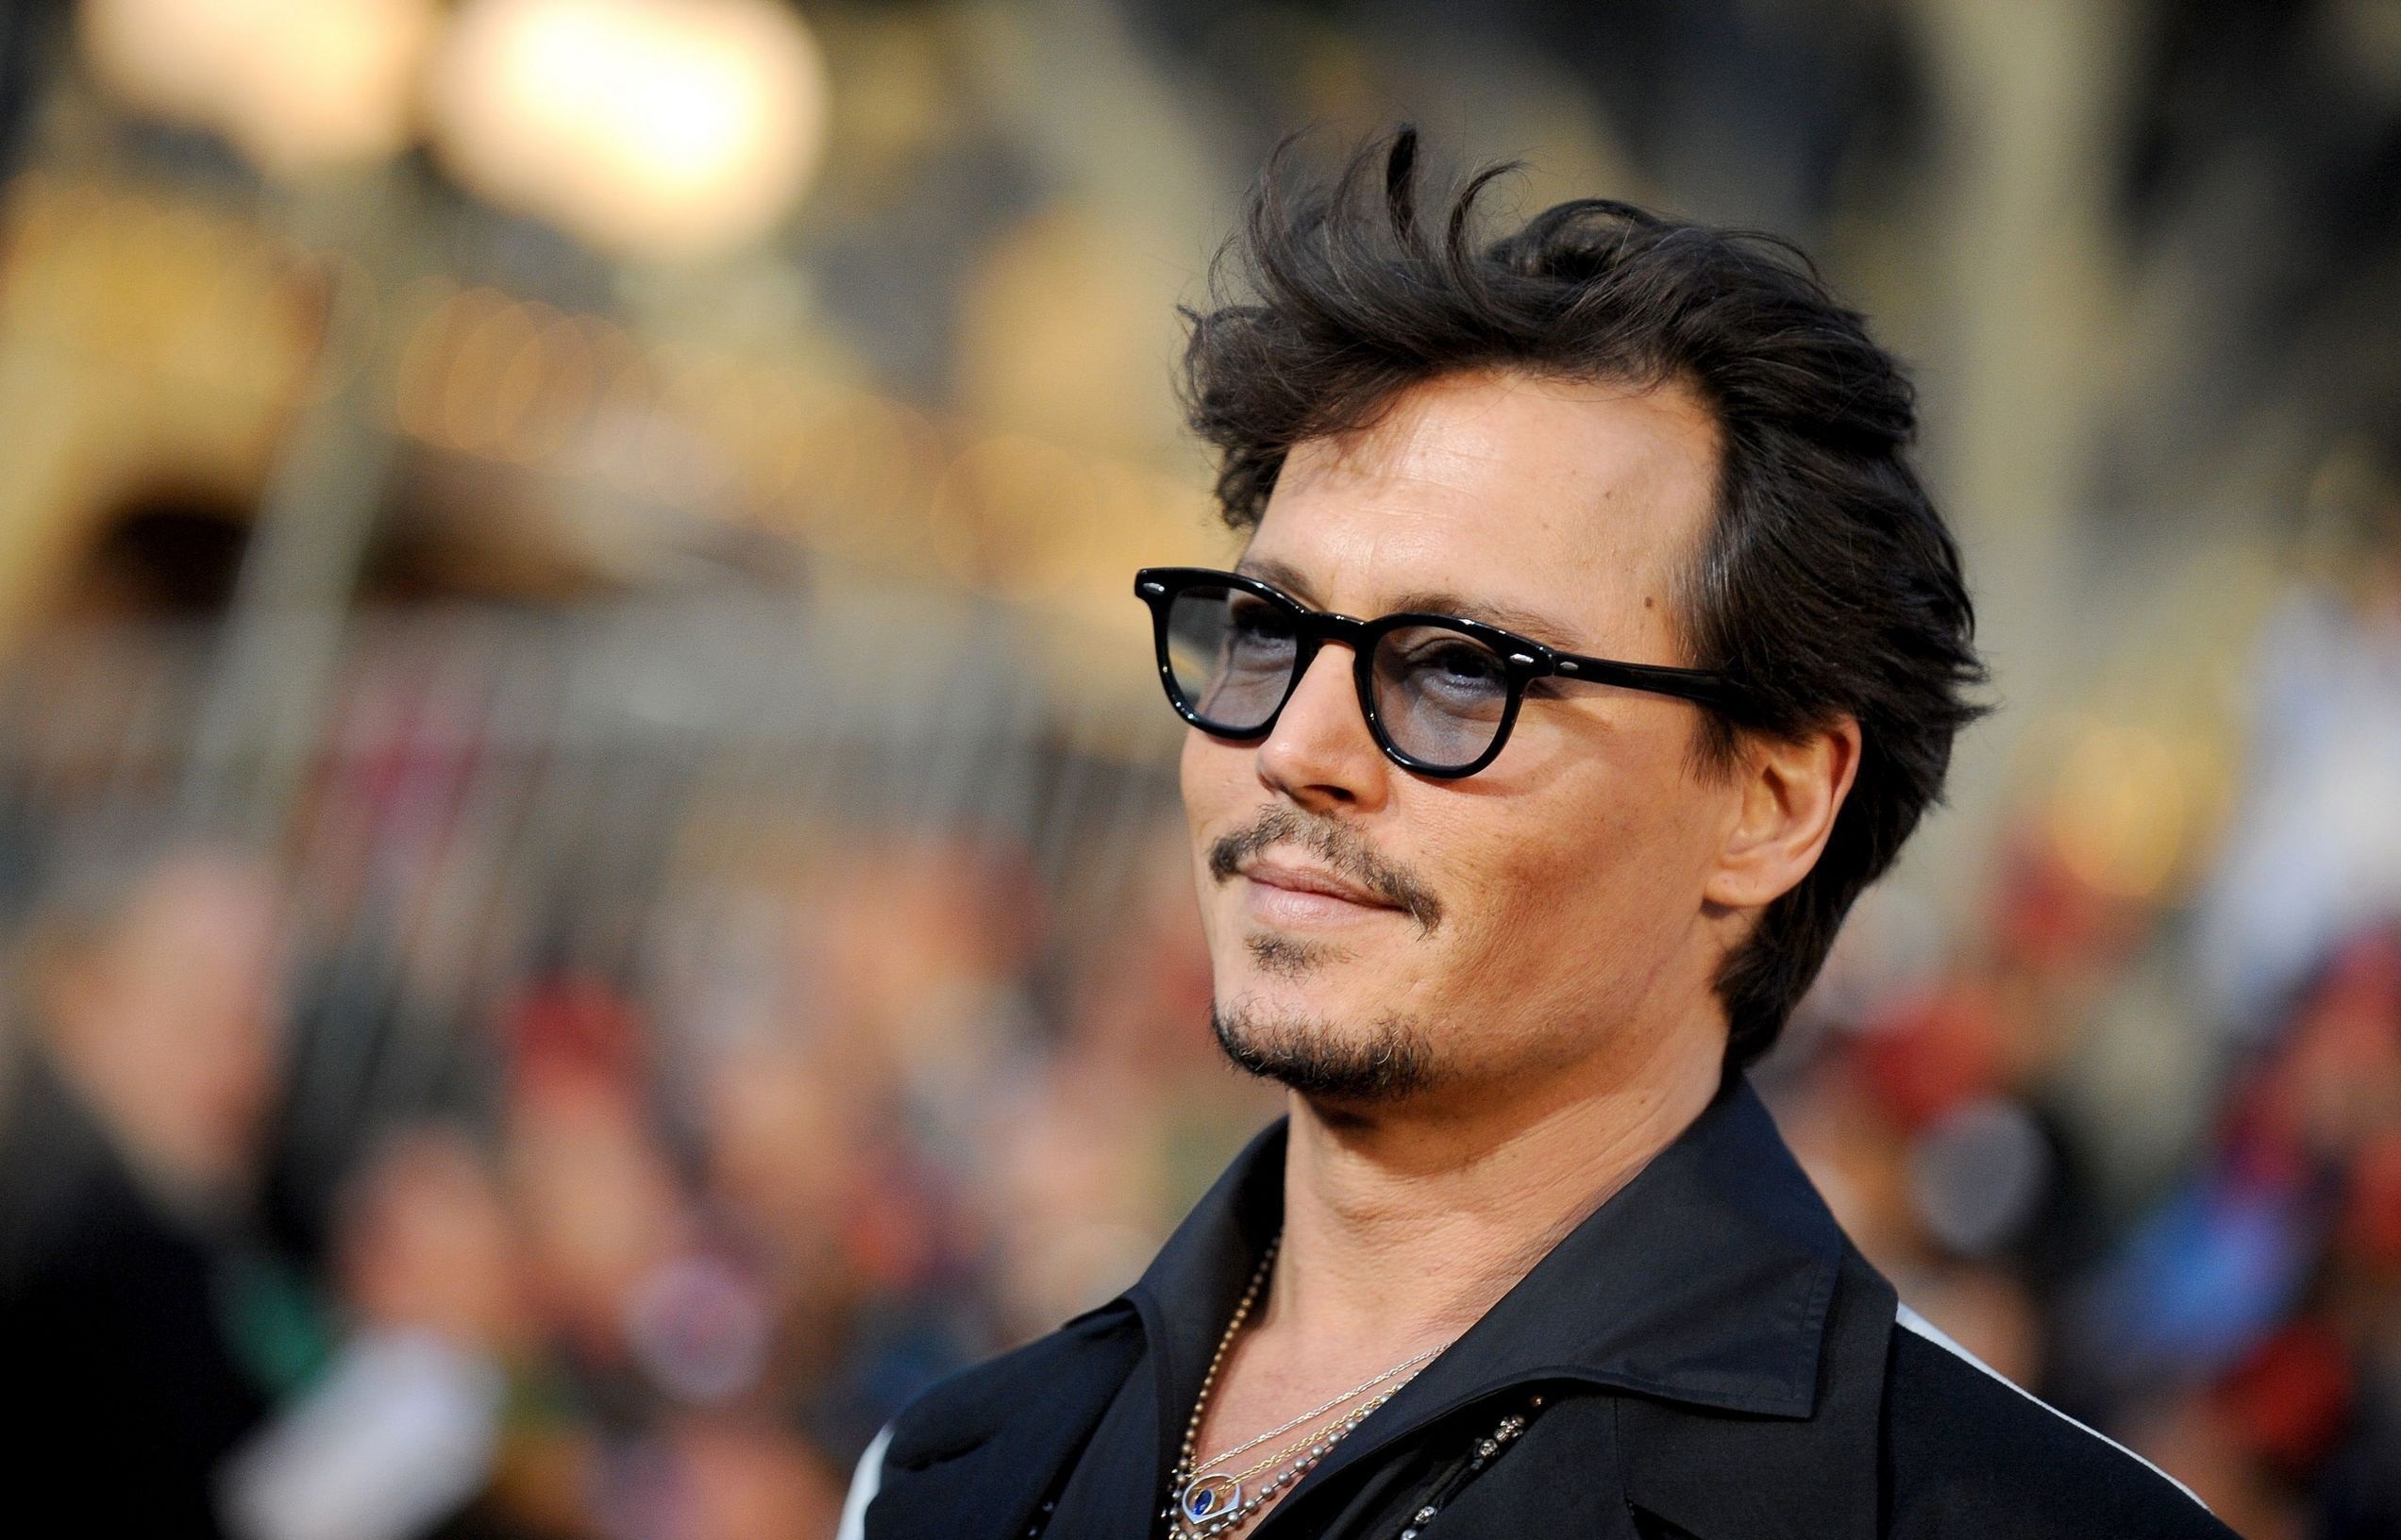 Johnny Depp: Formed the rock supergroup Hollywood Vampires with Alice Cooper and Joe Perry. 2550x1640 HD Background.